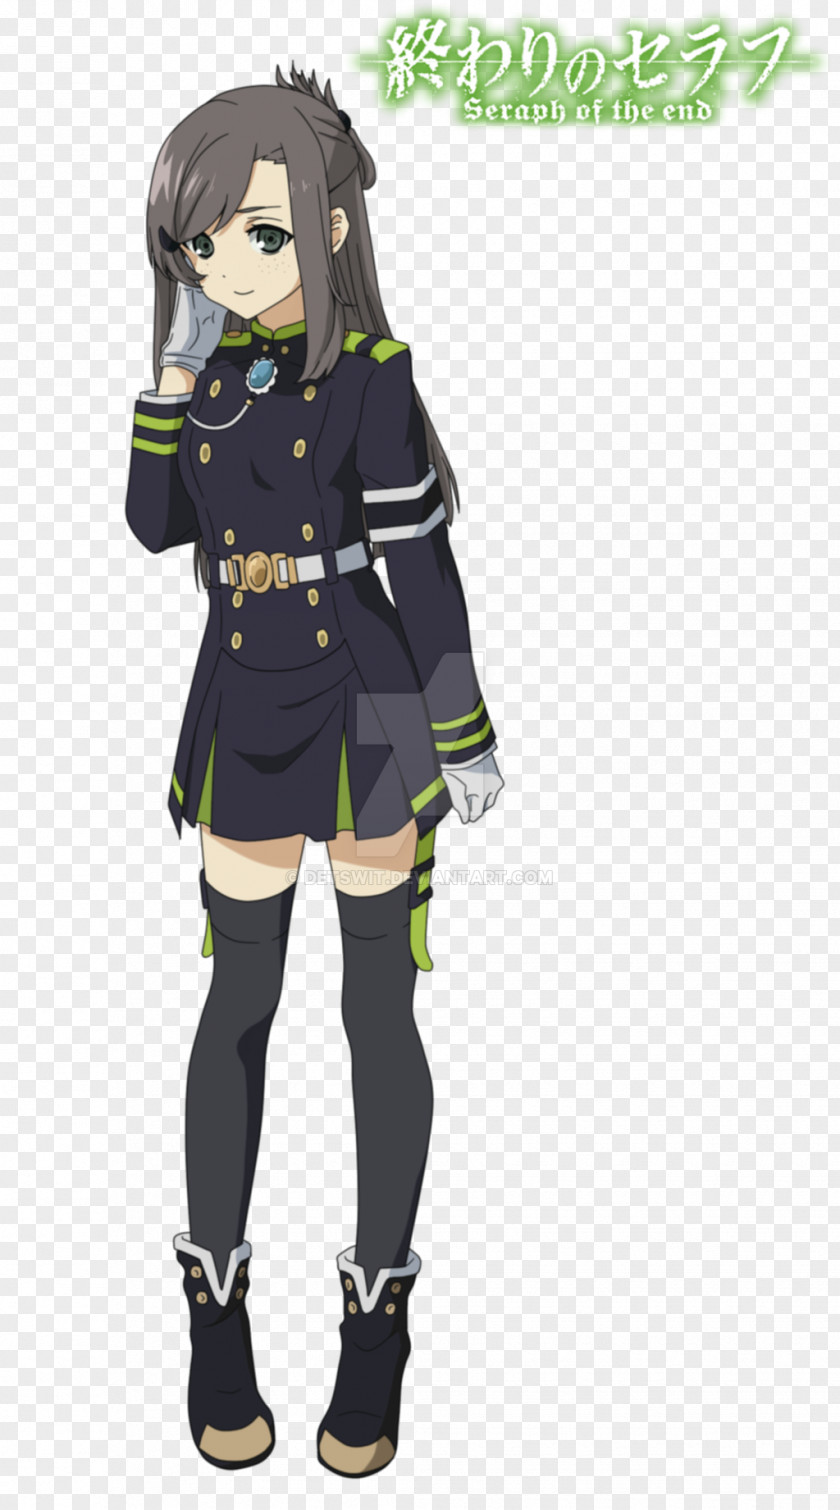 The End Seraph Of Archangel Clothing PNG